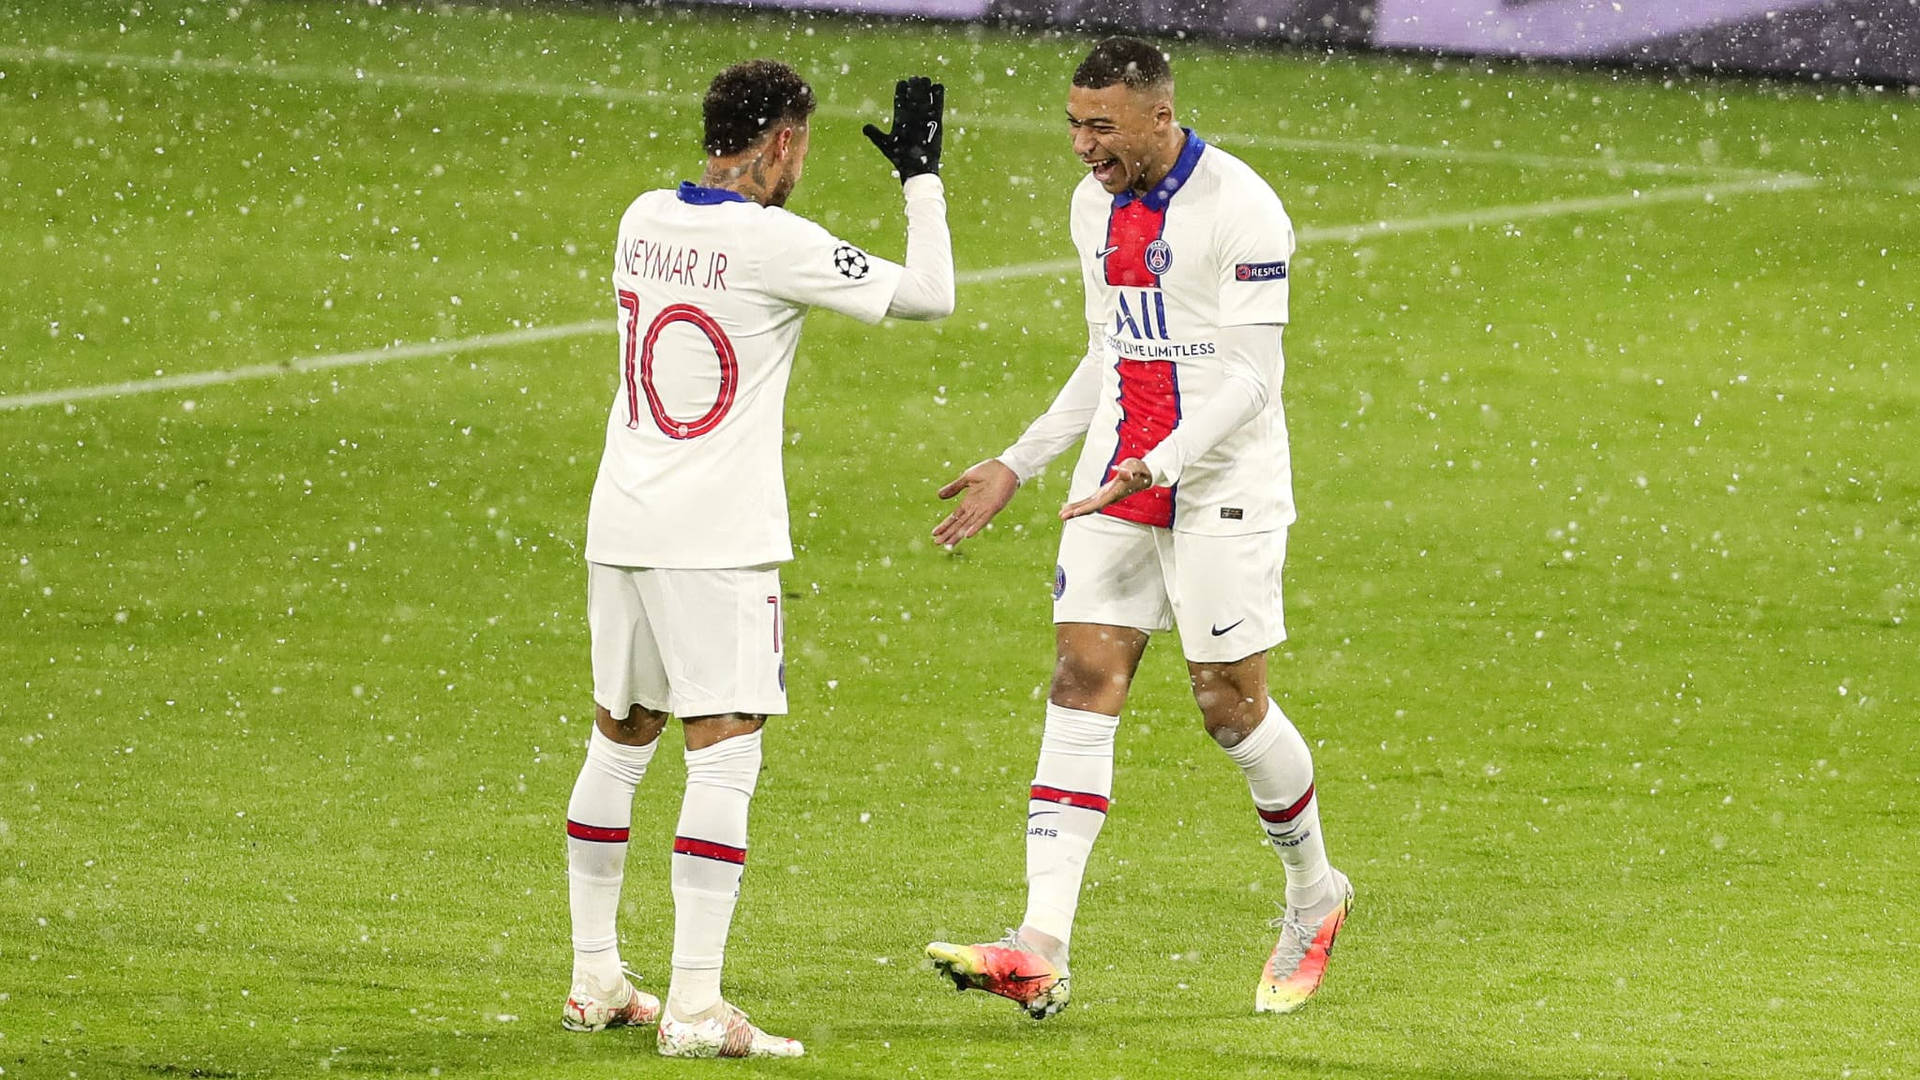 Neymar And Mbappe On Pitch Wallpaper